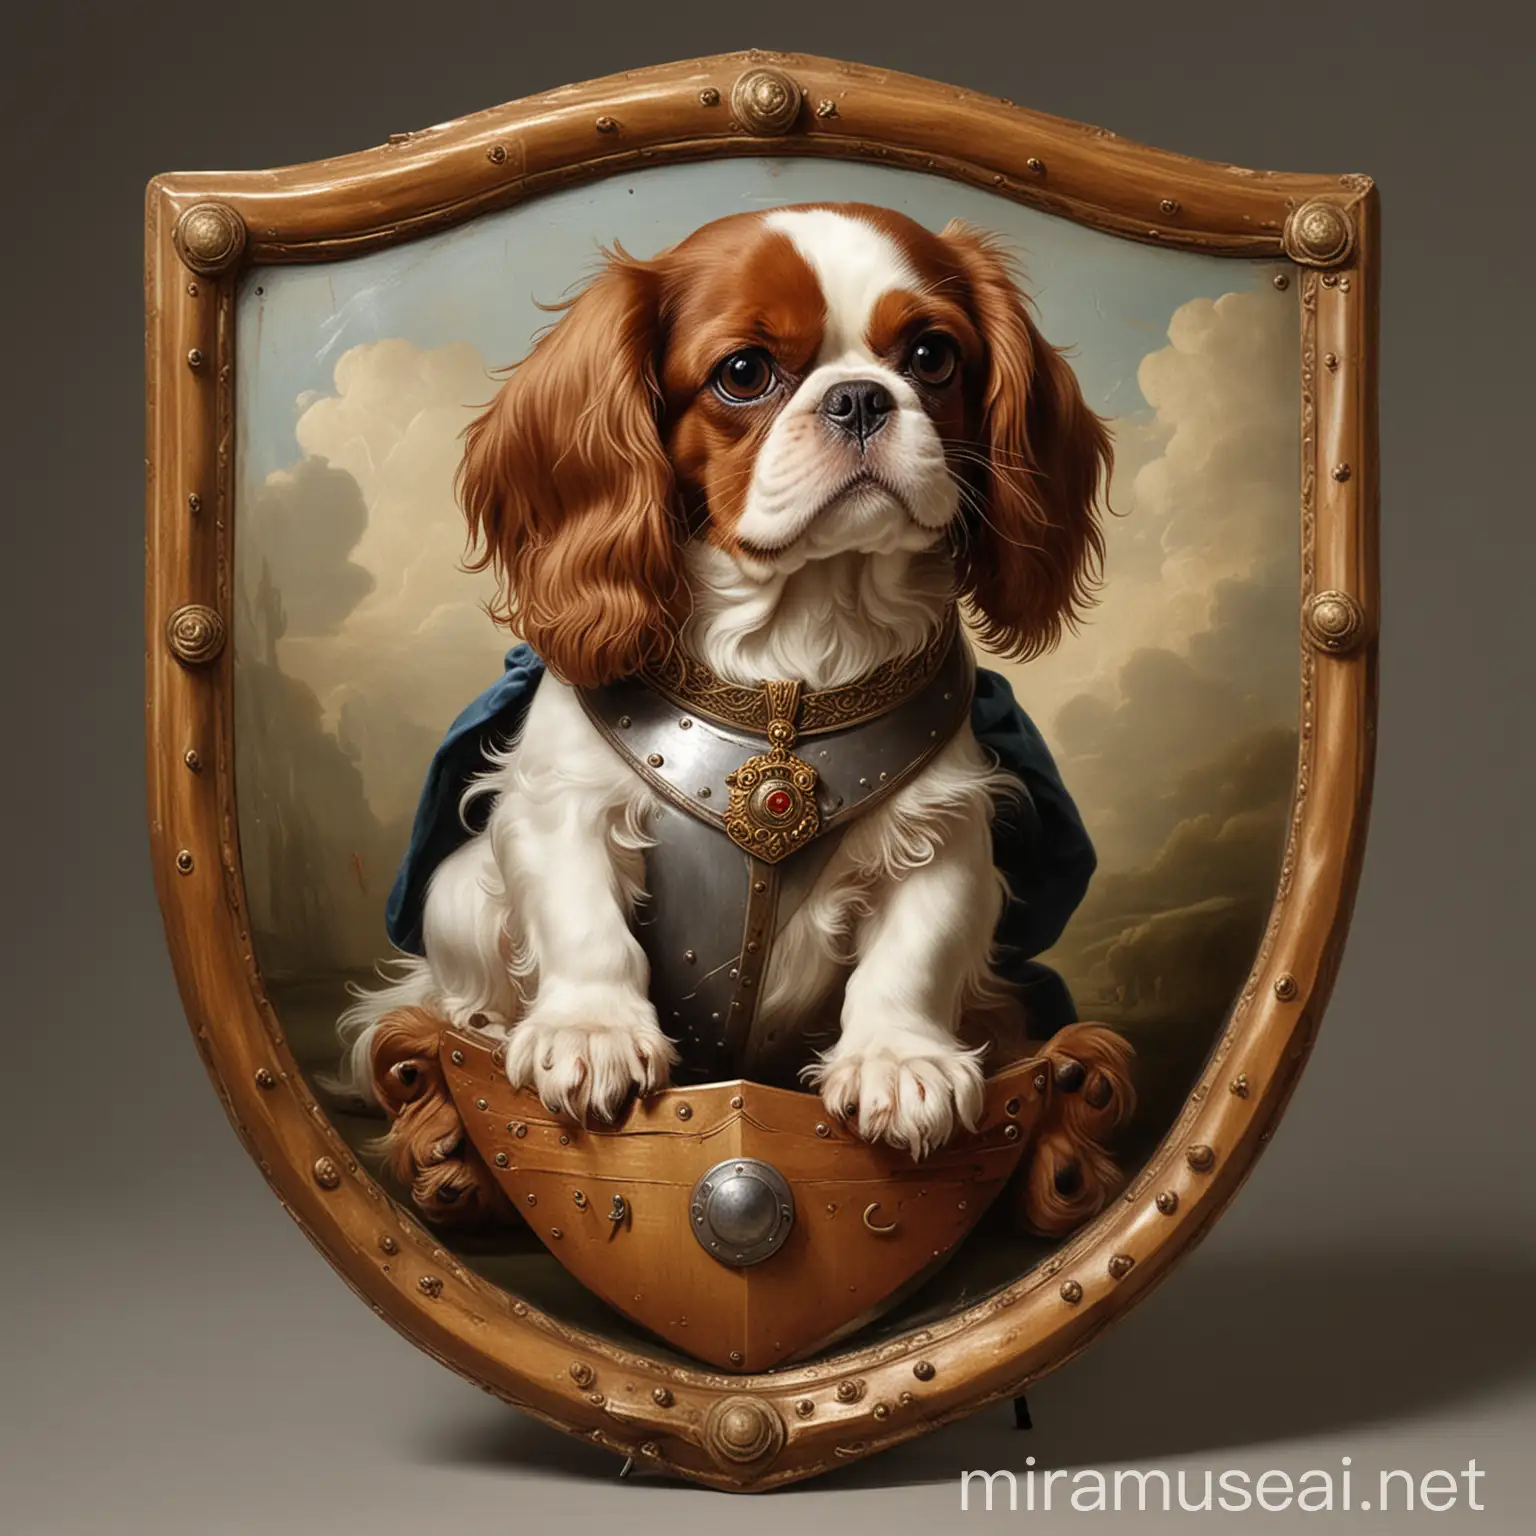 Regal King Charles Spaniel Holding Shield in Noble Pose